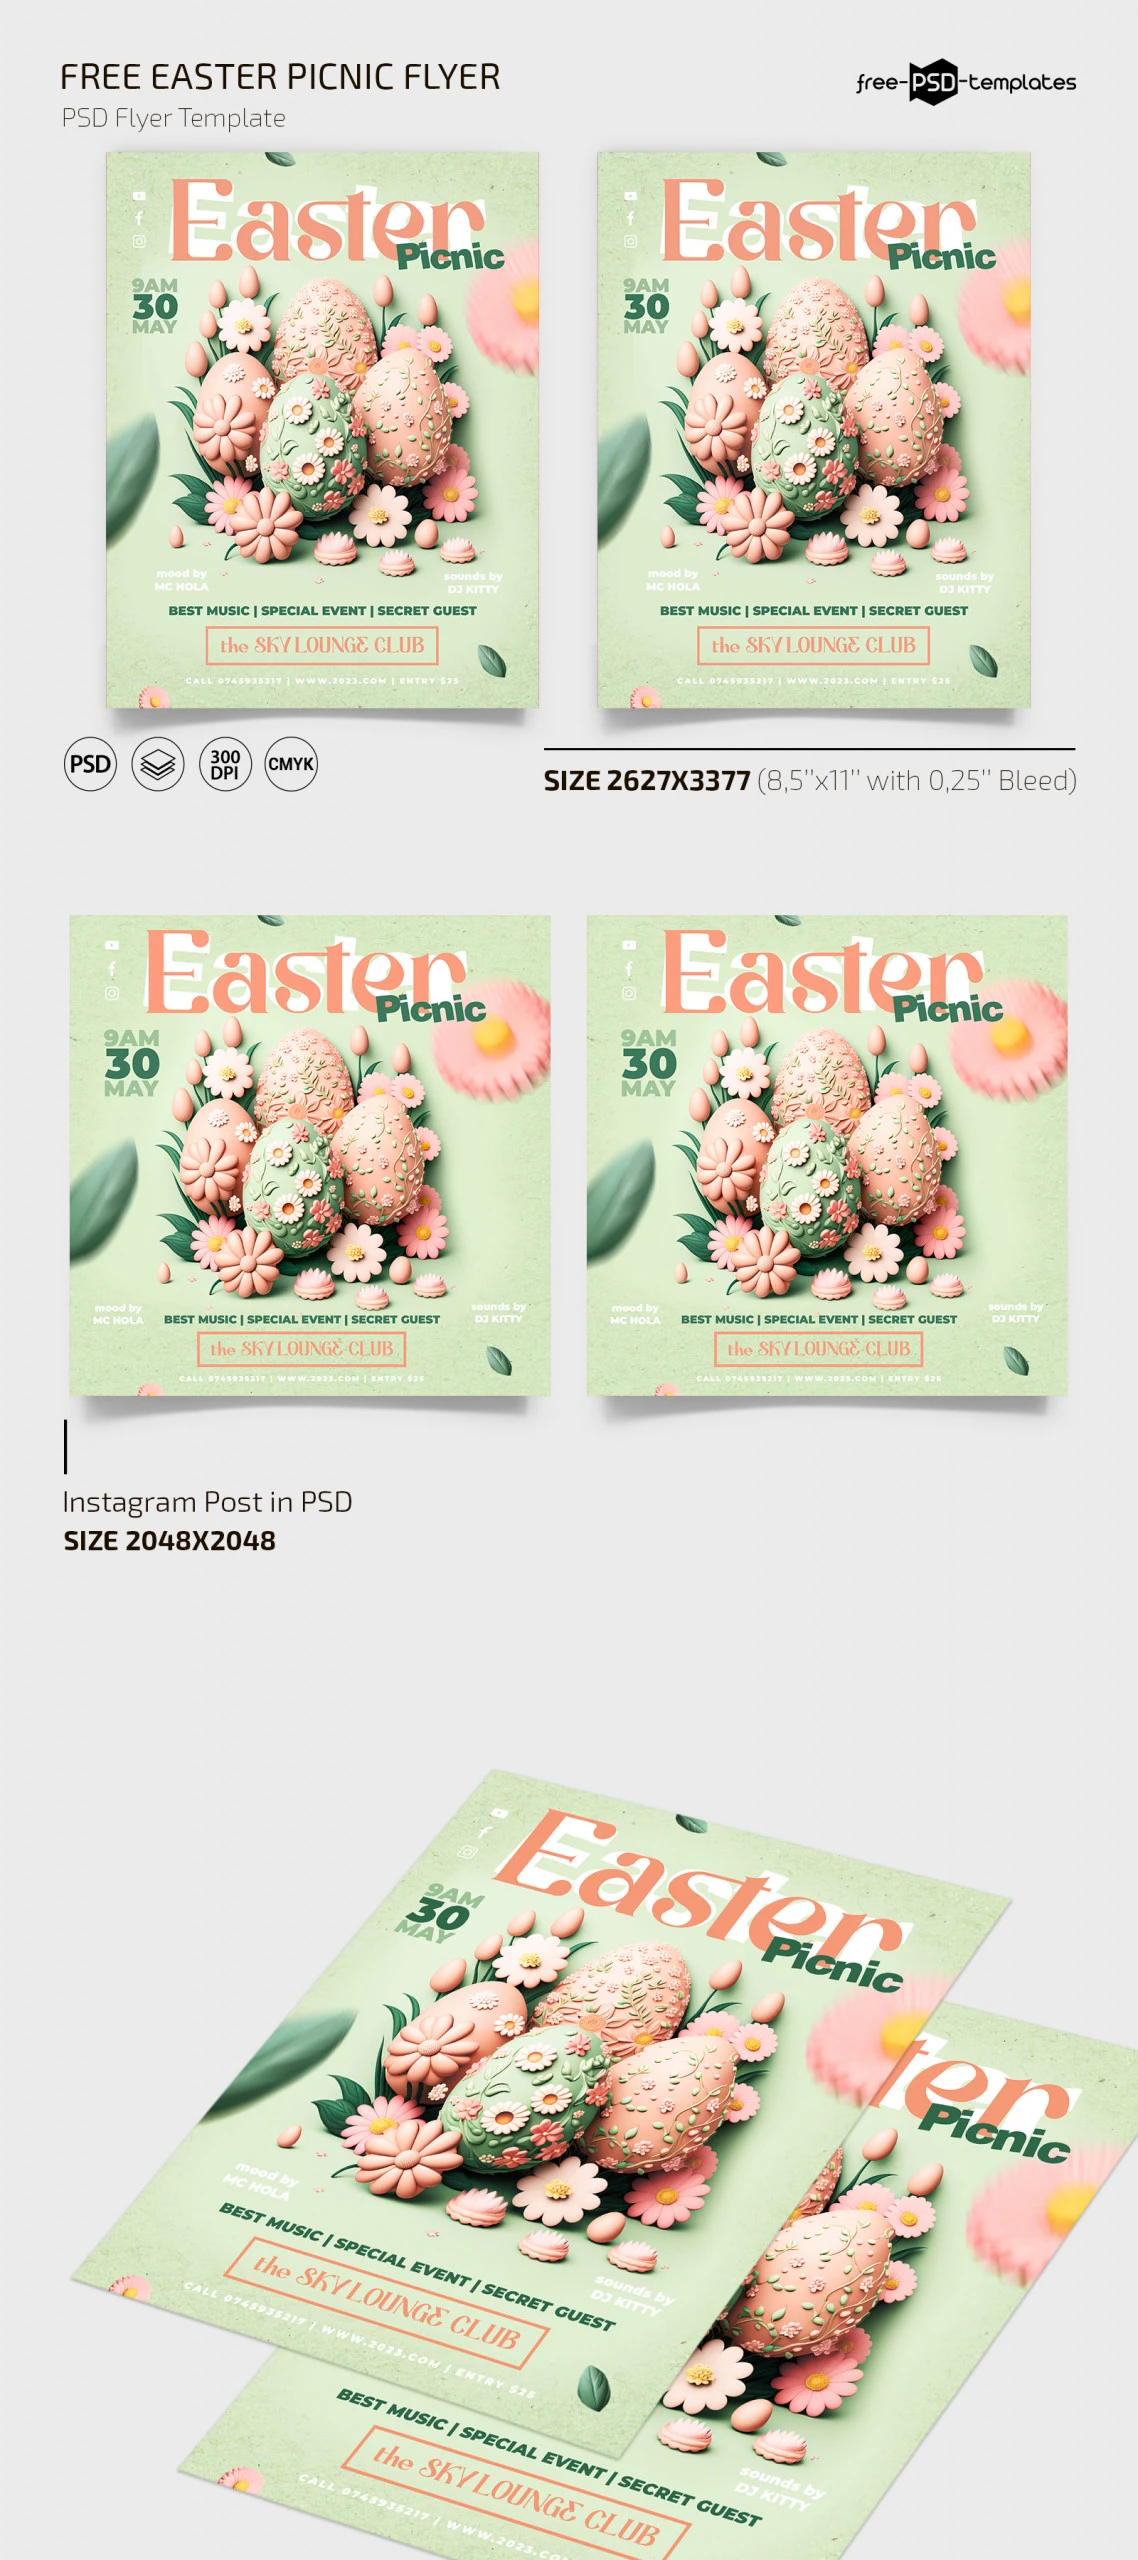 Free Easter Picnic Flyer Template + Instagram Post (PSD)